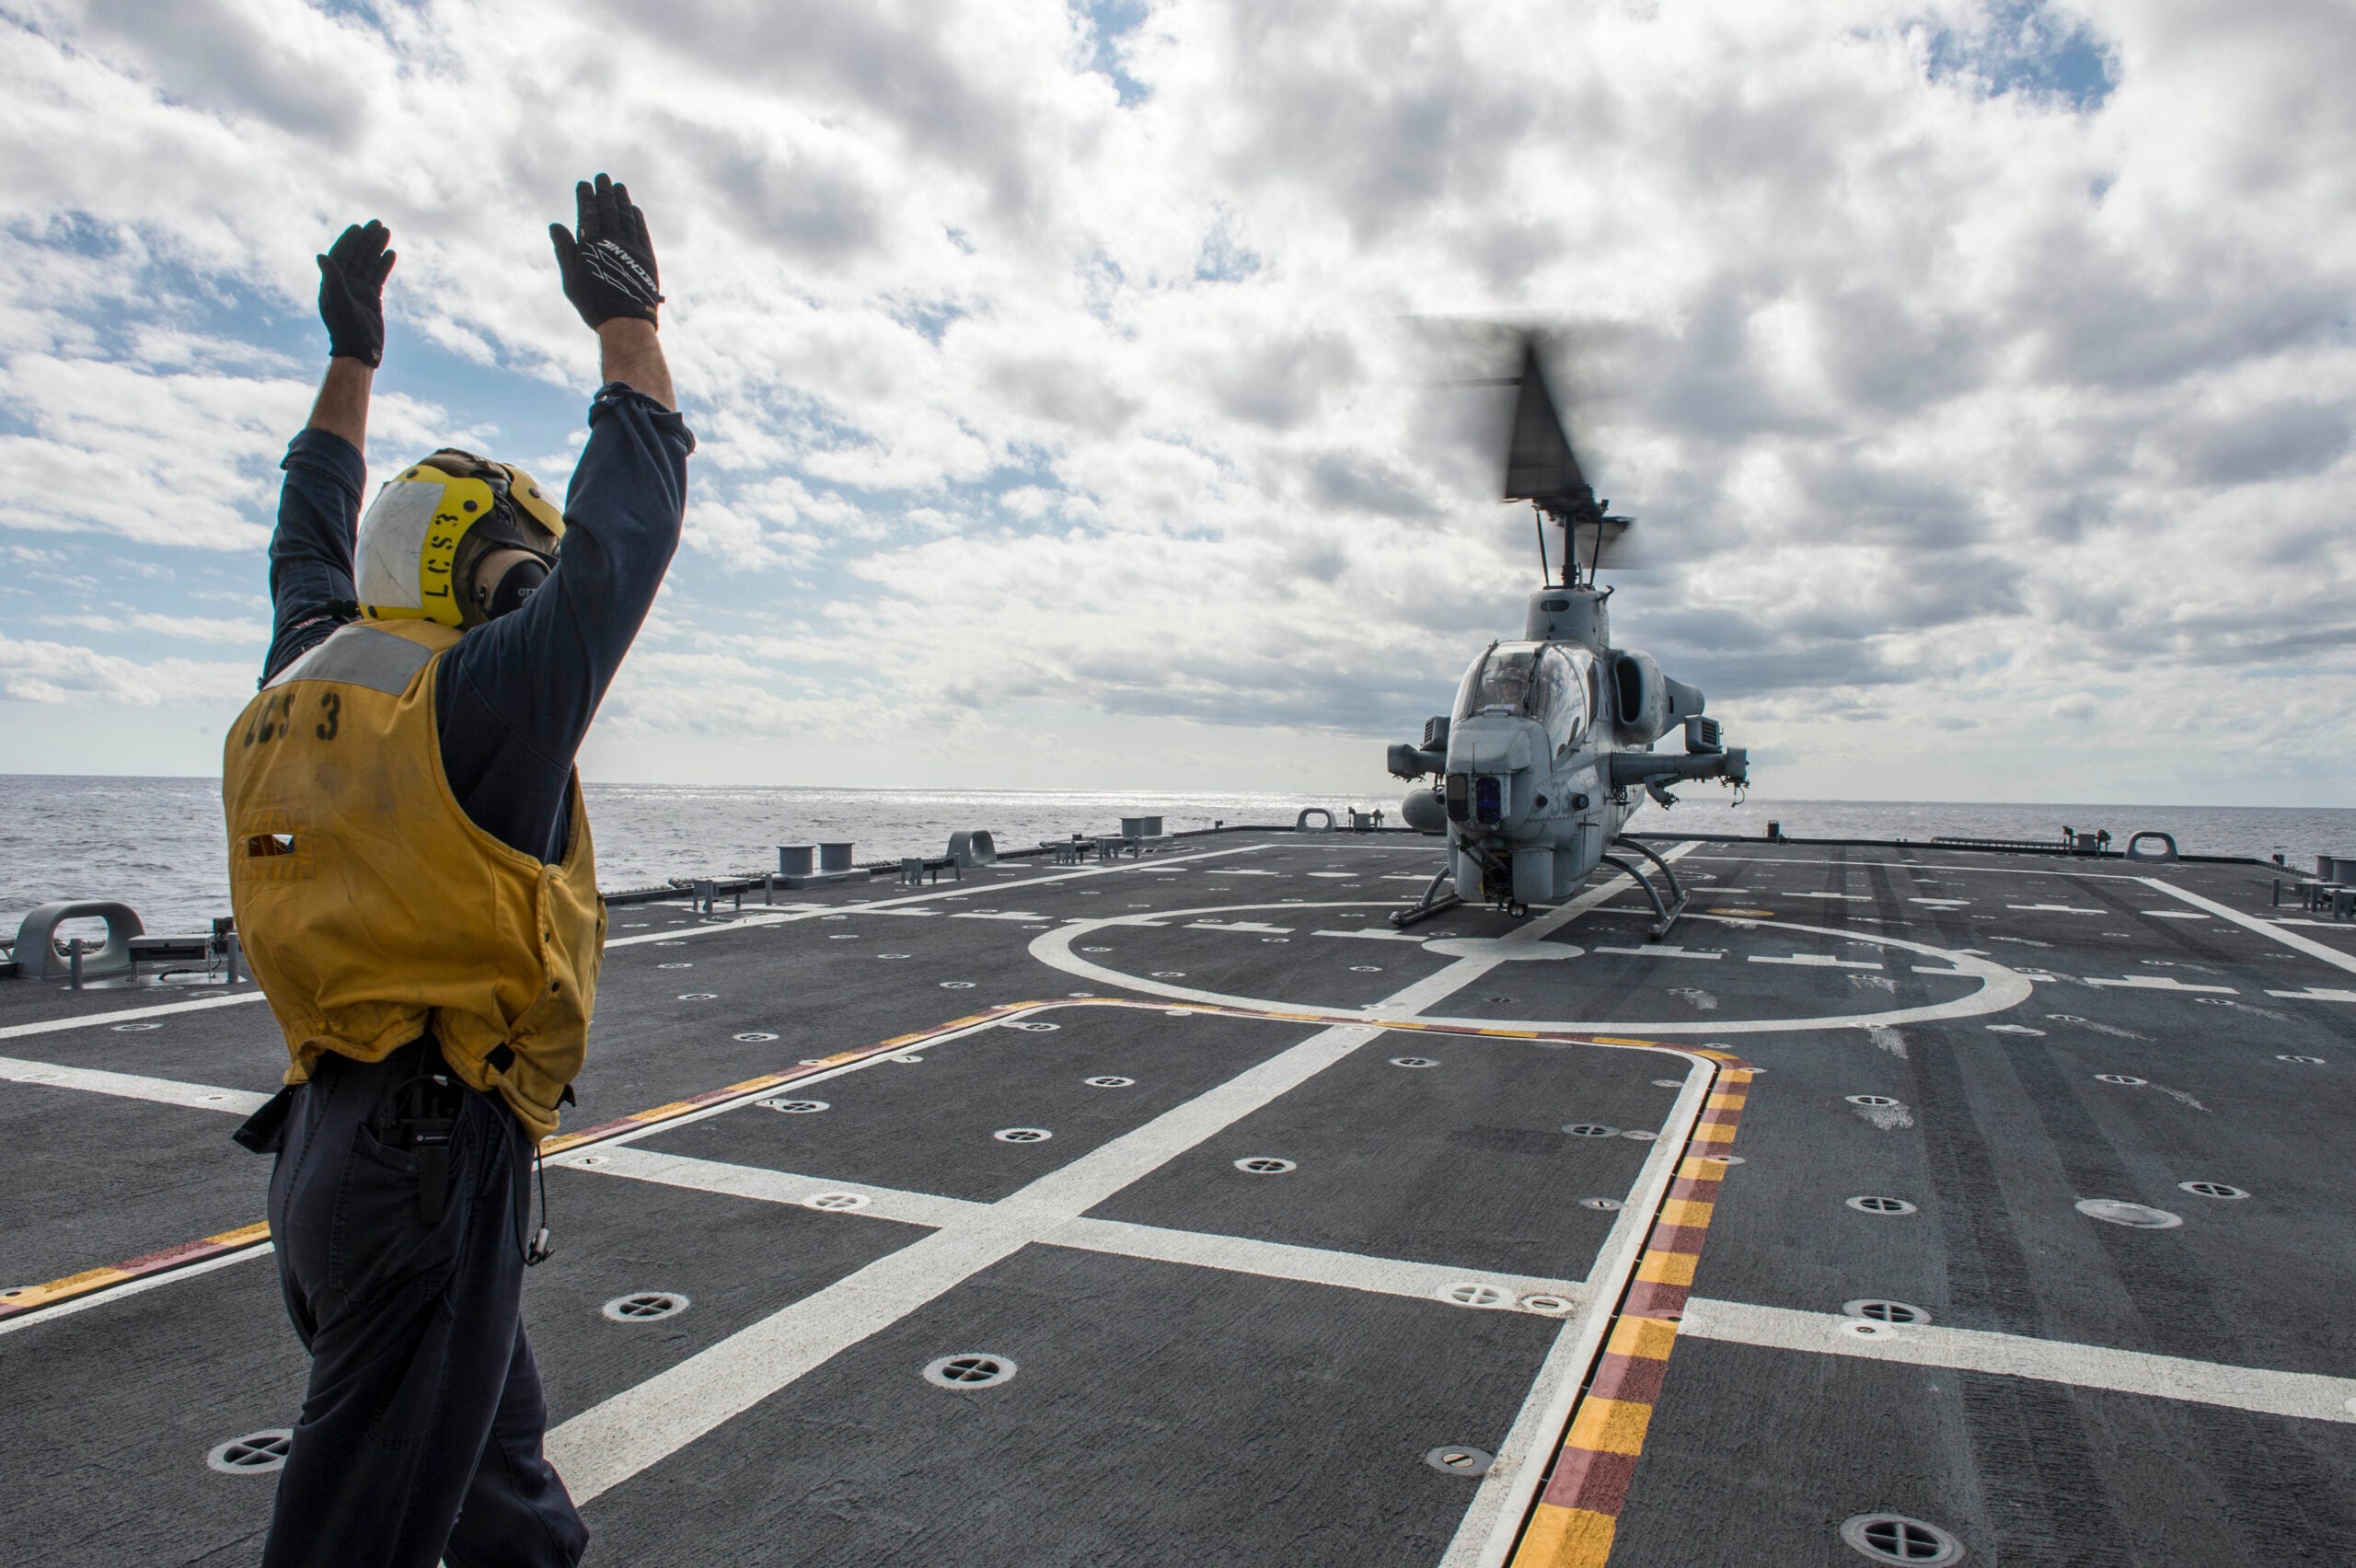 Boatswain's Mate 2nd Class Adam Garnett from Anchorage, Alaska, signals an AH-1 Cobra helicopter from Marine Air Group (MAG) 24 during deck landing qualification training aboard the littoral combat ship USS Fort Worth (LCS 3). Fort Worth departed its home port of San Diego Nov. 17 for a 16-month rotational deployment to Southeast Asia in support of the Navy’s strategic rebalance to the Pacific. (U.S. Navy photo by Mass Communication Specialist 2nd Class Antonio P. Turretto Ramos)